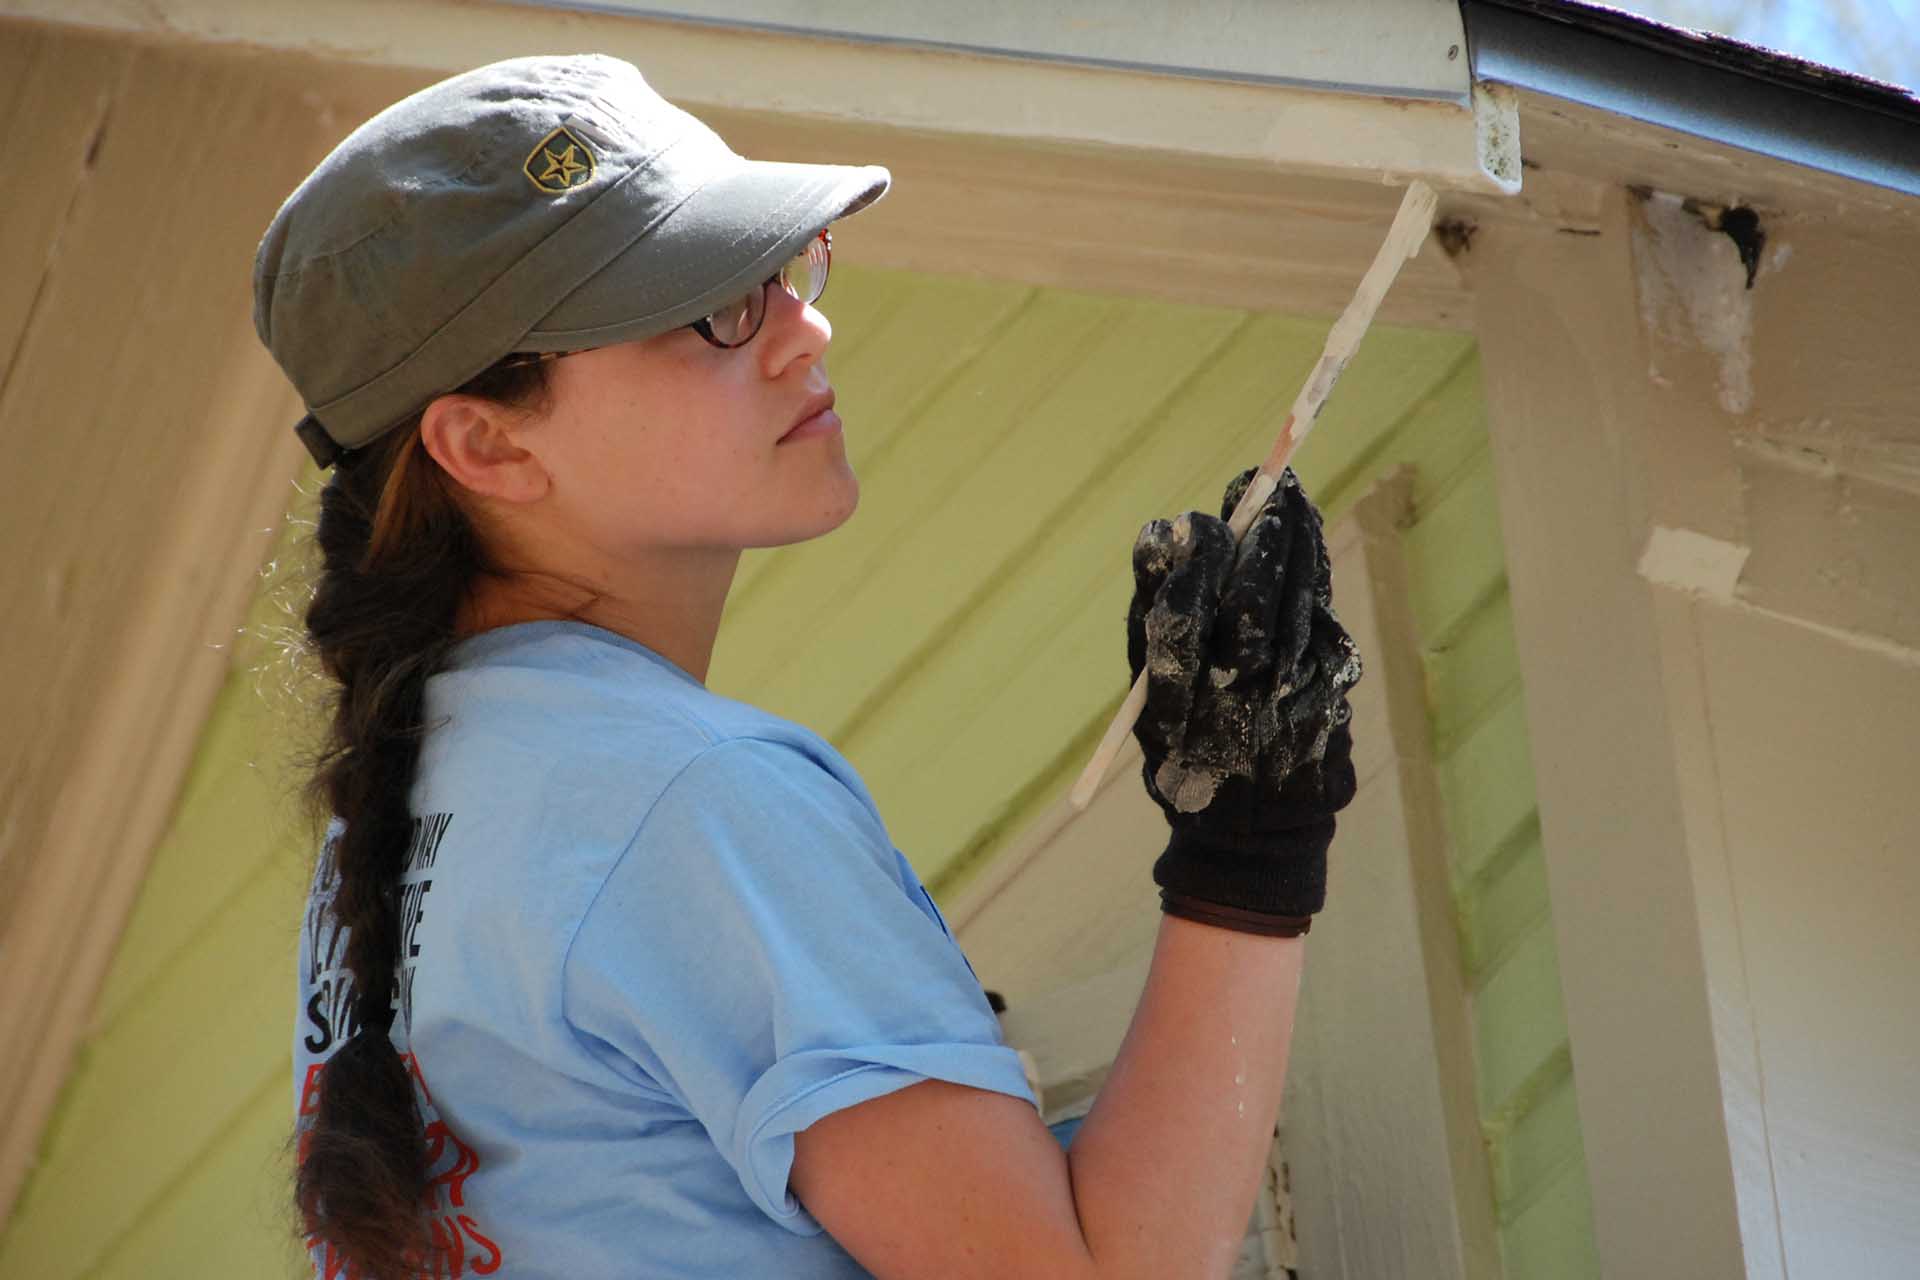 Teen girl painting trim on a house